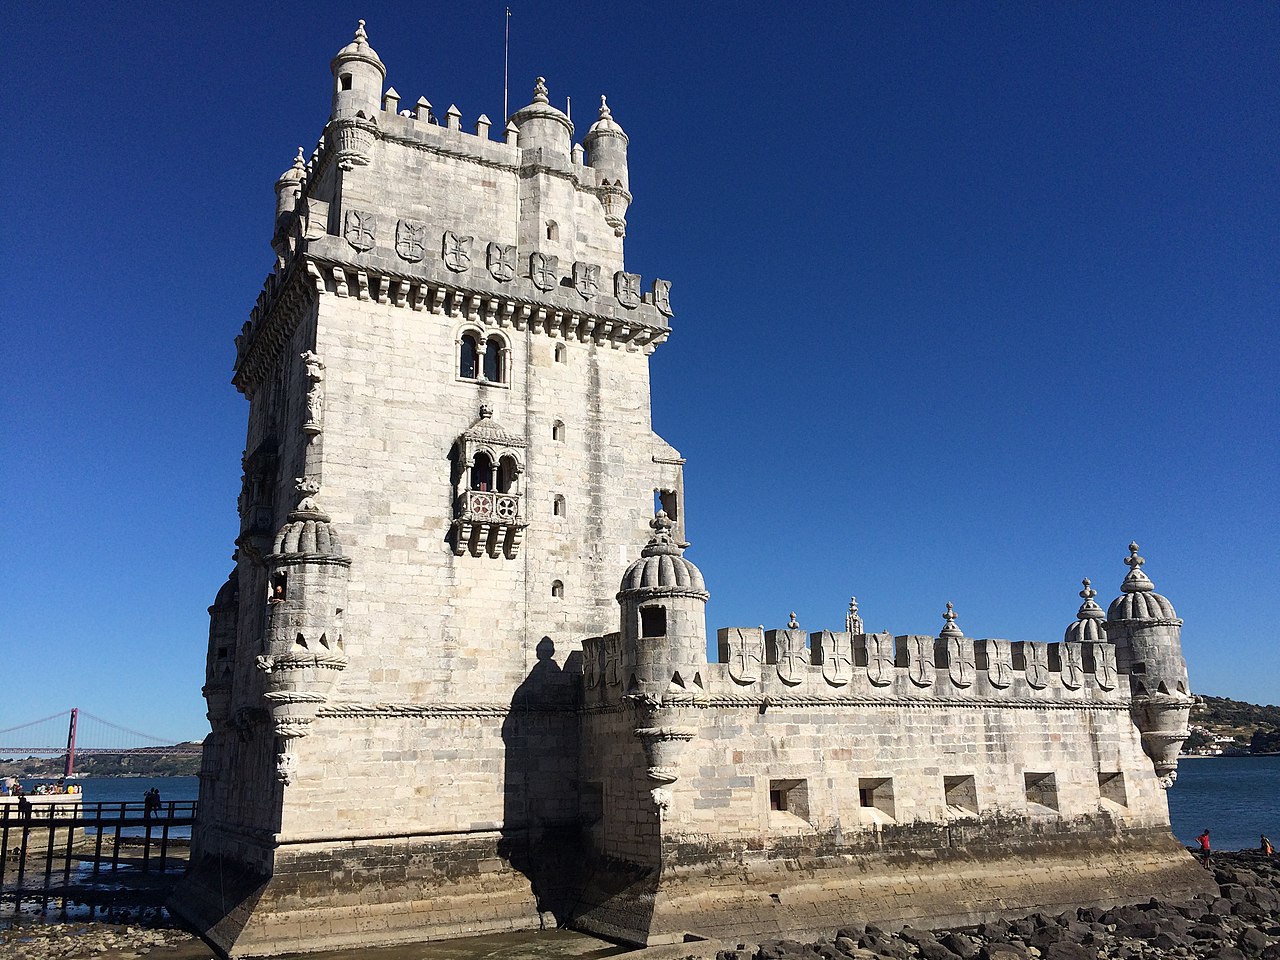 Belém Tower, officially known as the Tower of Saint Vincent (Portuguese: Torre de São Vicente), is a 16th-century fortification located in Lisbon, Portugal. It served as a point of embarkation and disembarkation for Portuguese explorers and as a ceremonial gateway to the city. <br><br>The tower symbolizes Portugal's maritime and colonial power during the early modern period. Built during the height of the Portuguese Renaissance and constructed from lioz limestone, the structure comprises a bastion and a 100-foot, four-story tower.